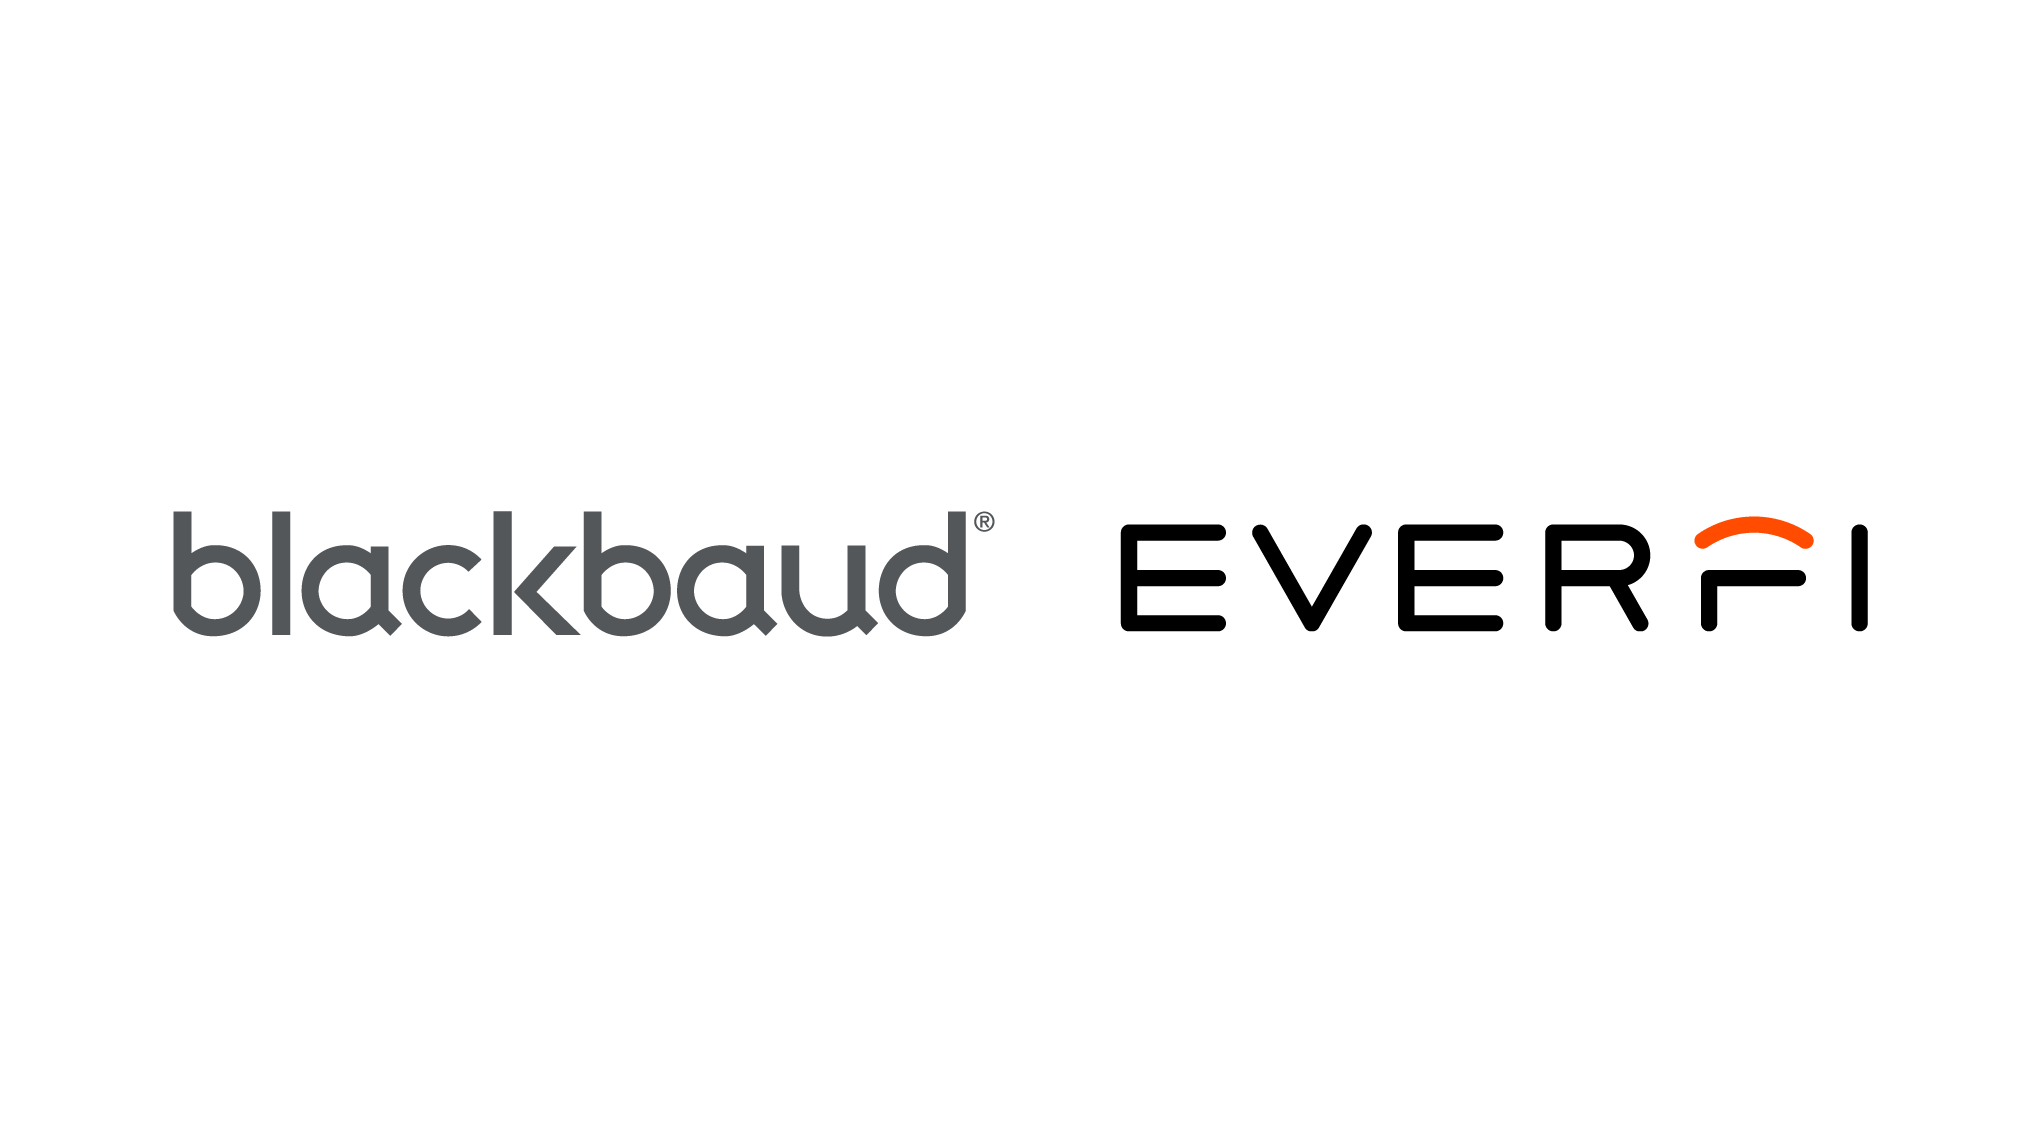 Cloud Software Firm Blackbaud Acquires Washington Dc-based Edtech Everfi for 0m